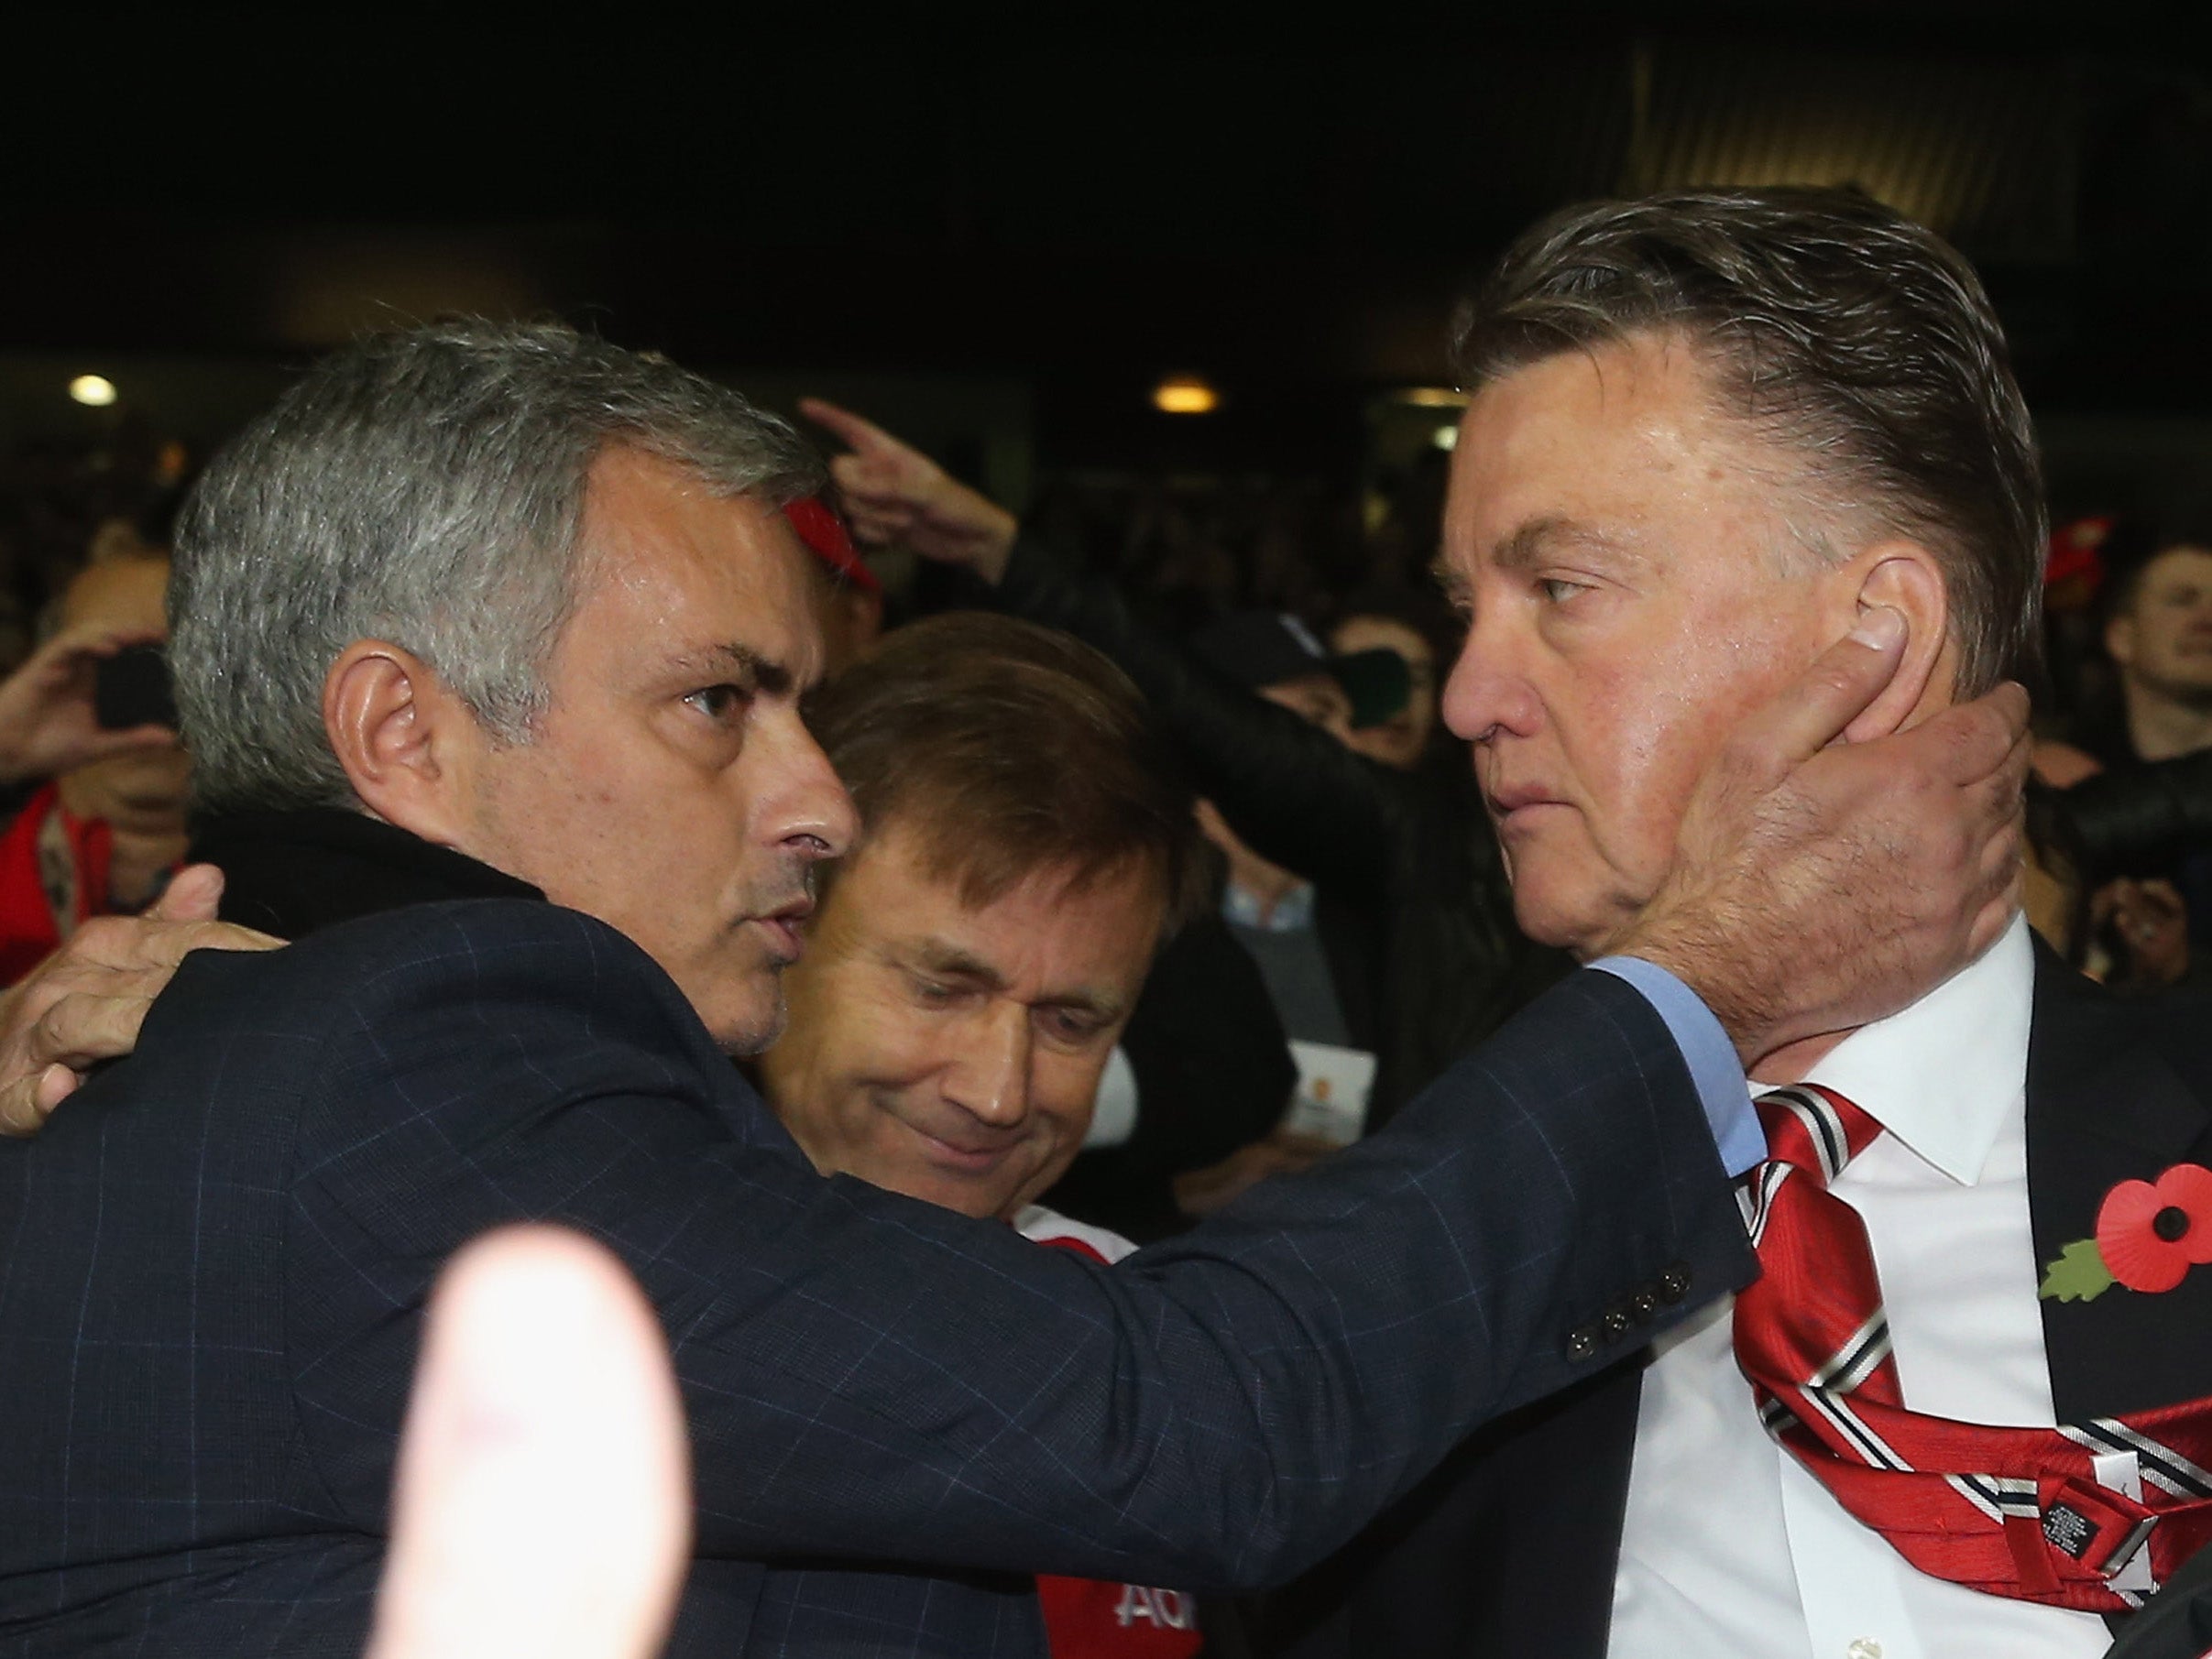 Jose Mourinho and Louis van Gaal are said to be good friends